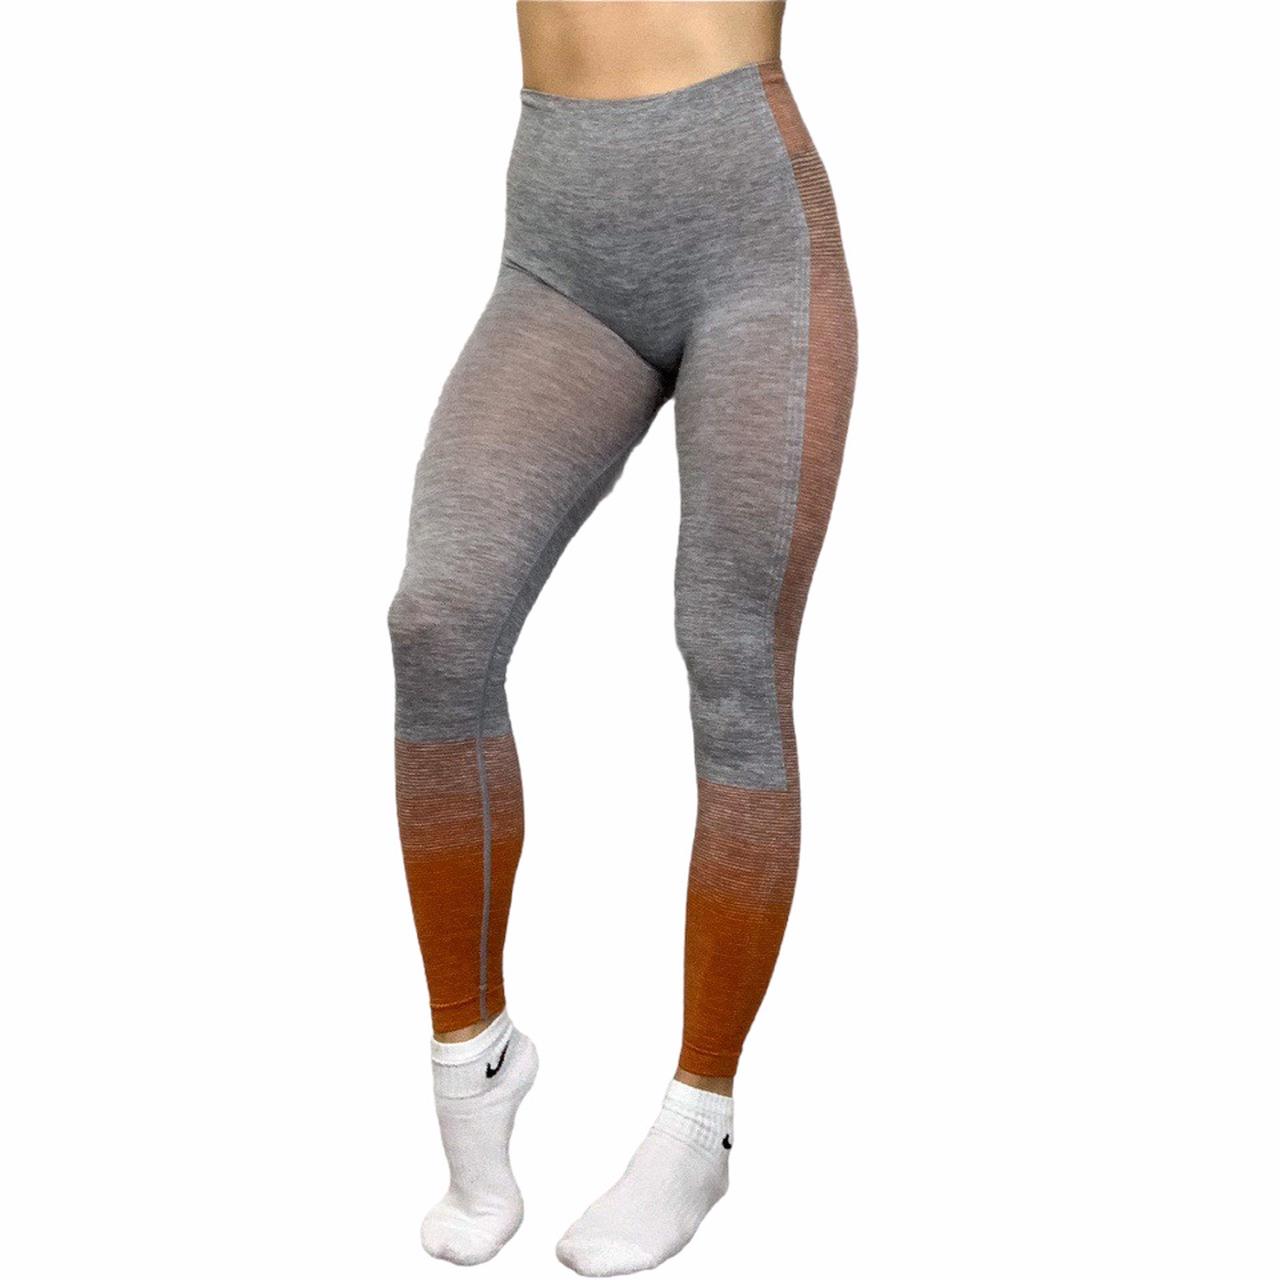 Product Image 1 - Super flattering gray seamless fitness